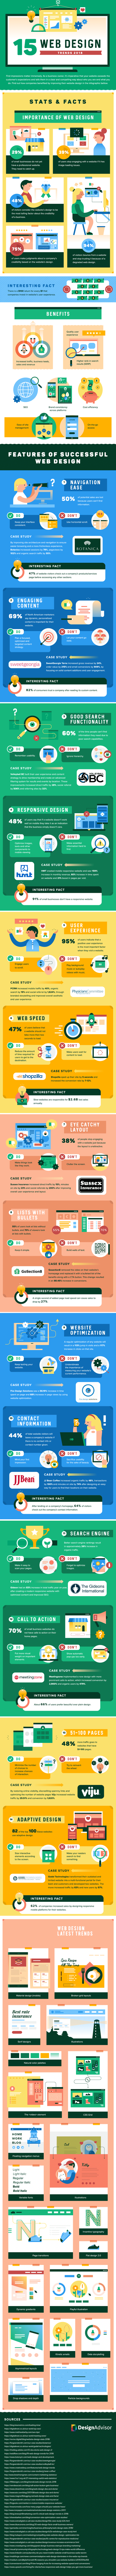 Top Conversions Boosting Web Design Trends of 2018 - Infographic